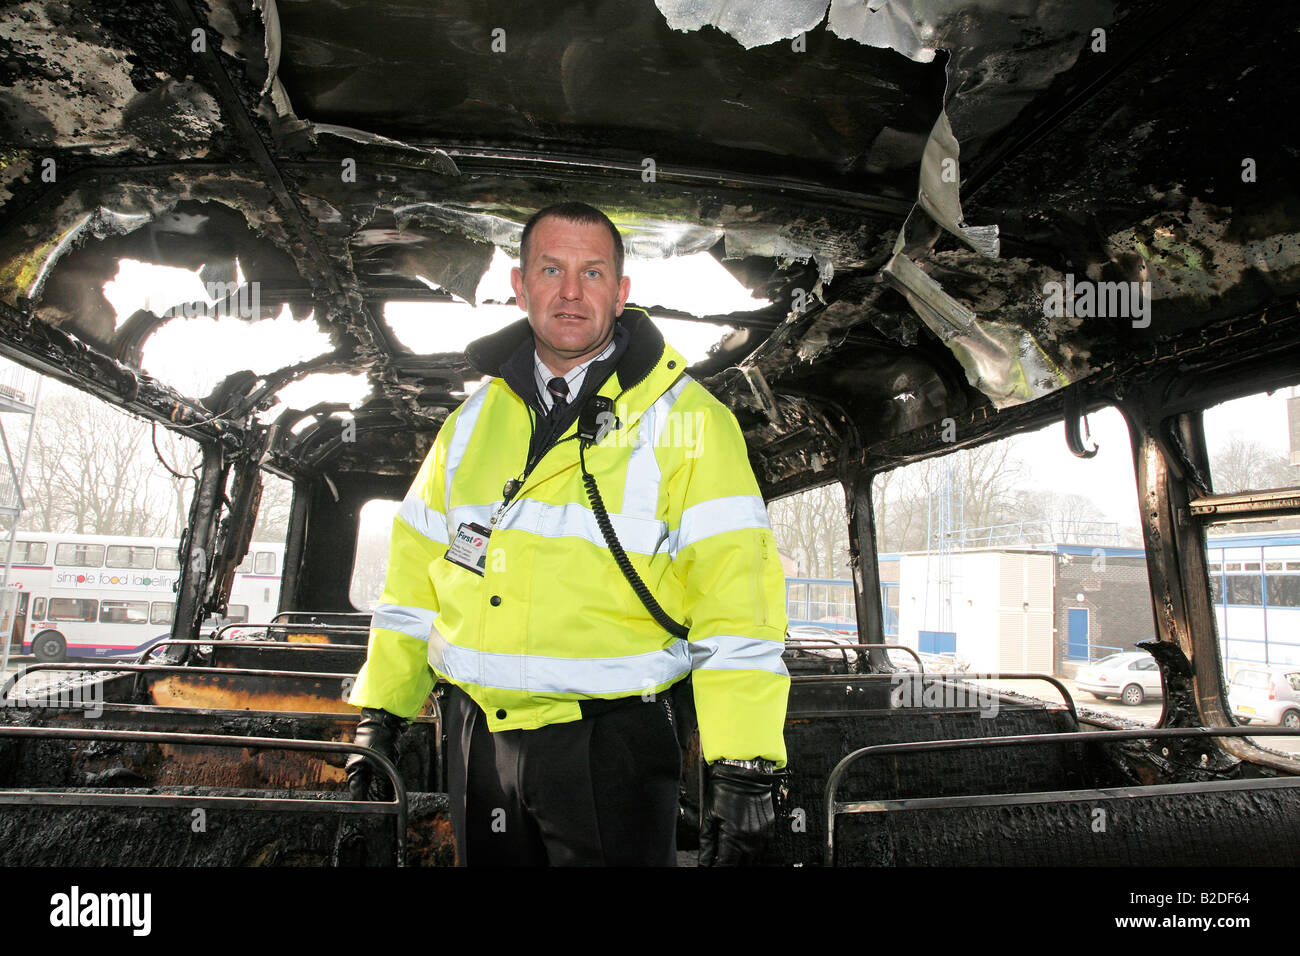 Official surveying fire damaged bus Stock Photo